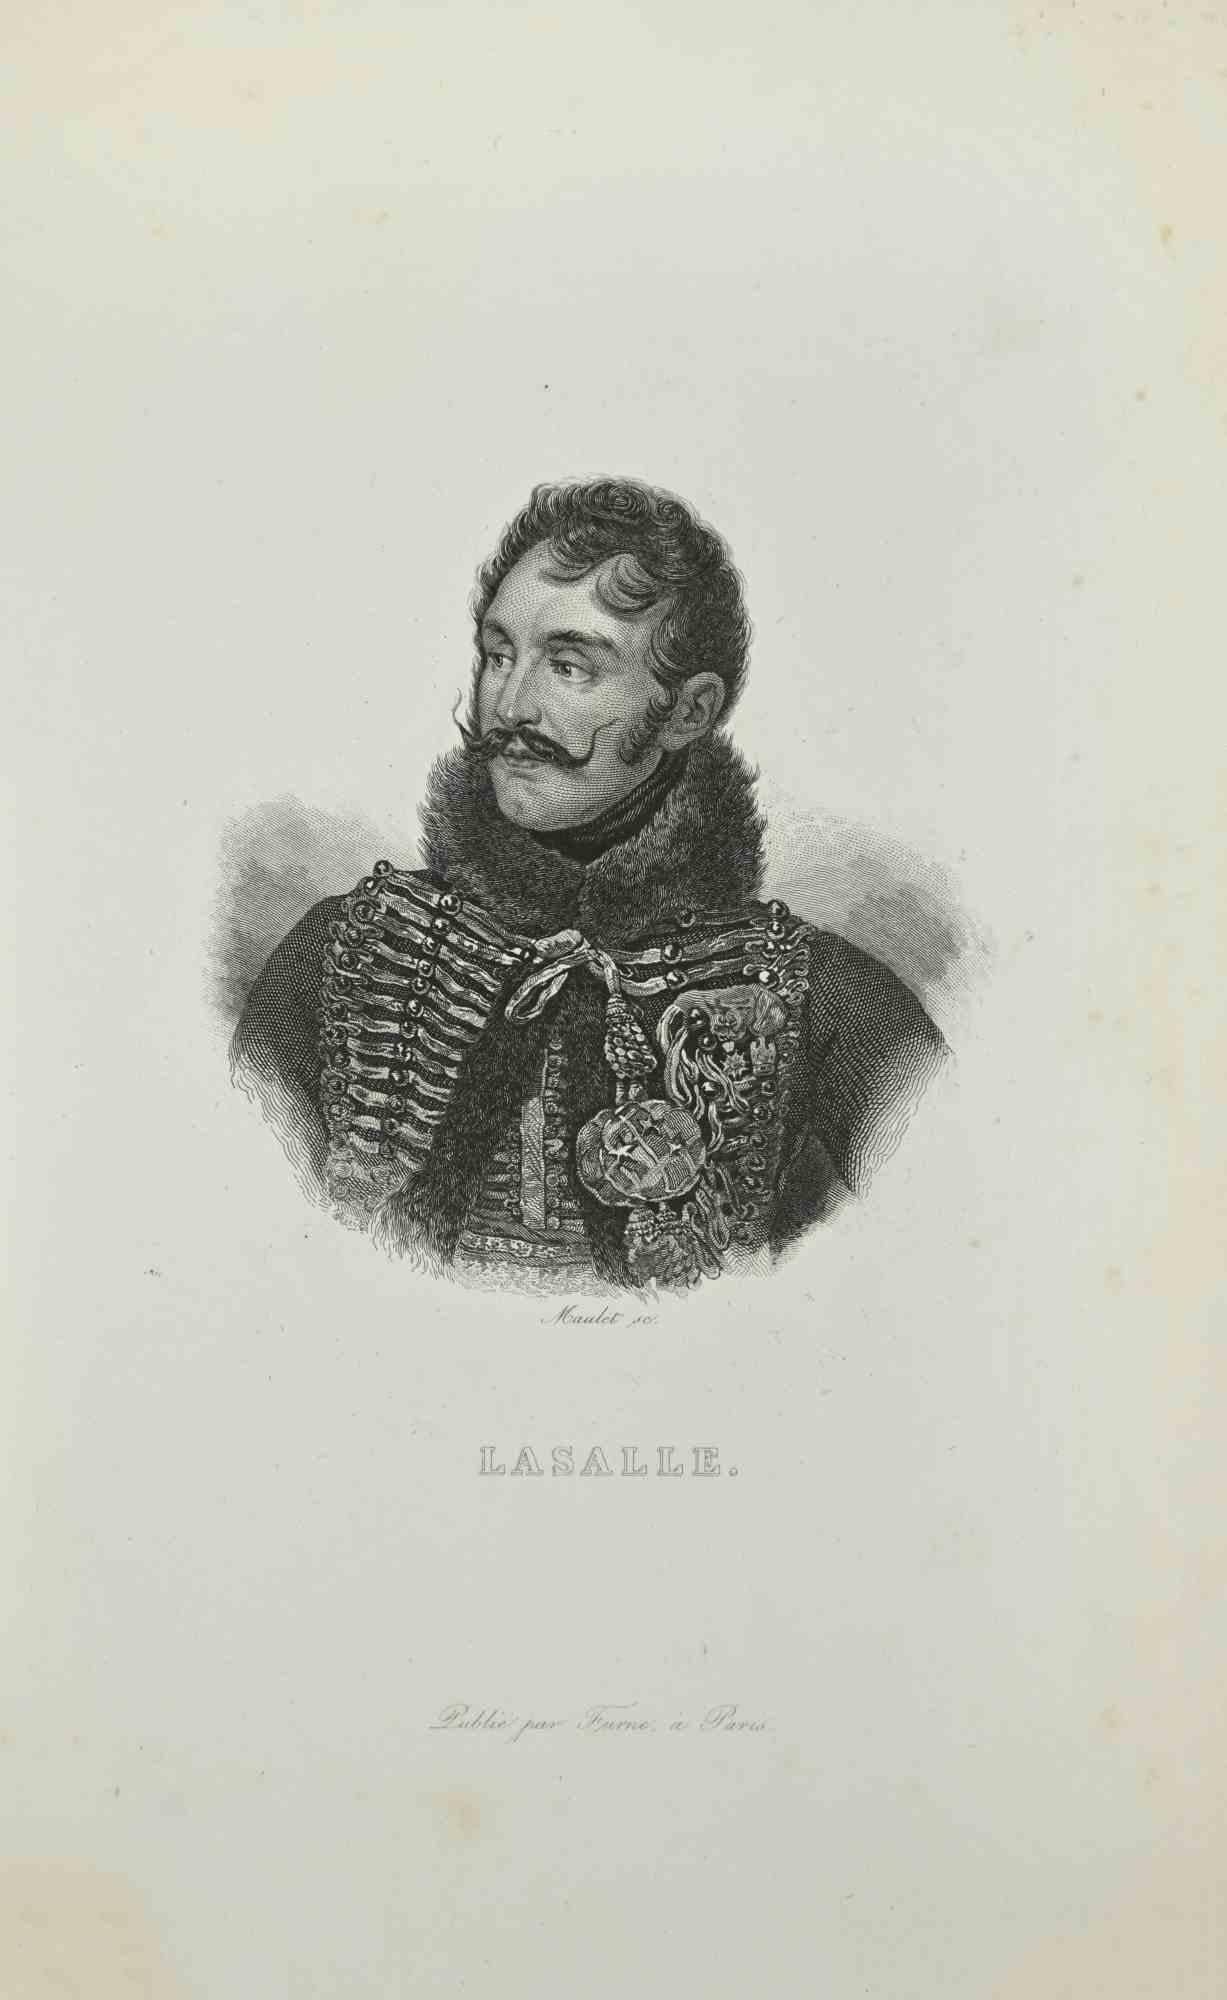 Lasalle is an original Etching realized by Maulet in 1837.

Good conditions.

The artwork is realized in a well-balanced composition. the artwork and belongs to the suite suite "AtlasBatt" realized within Jacques Norvins' Histoire de Napoleon,